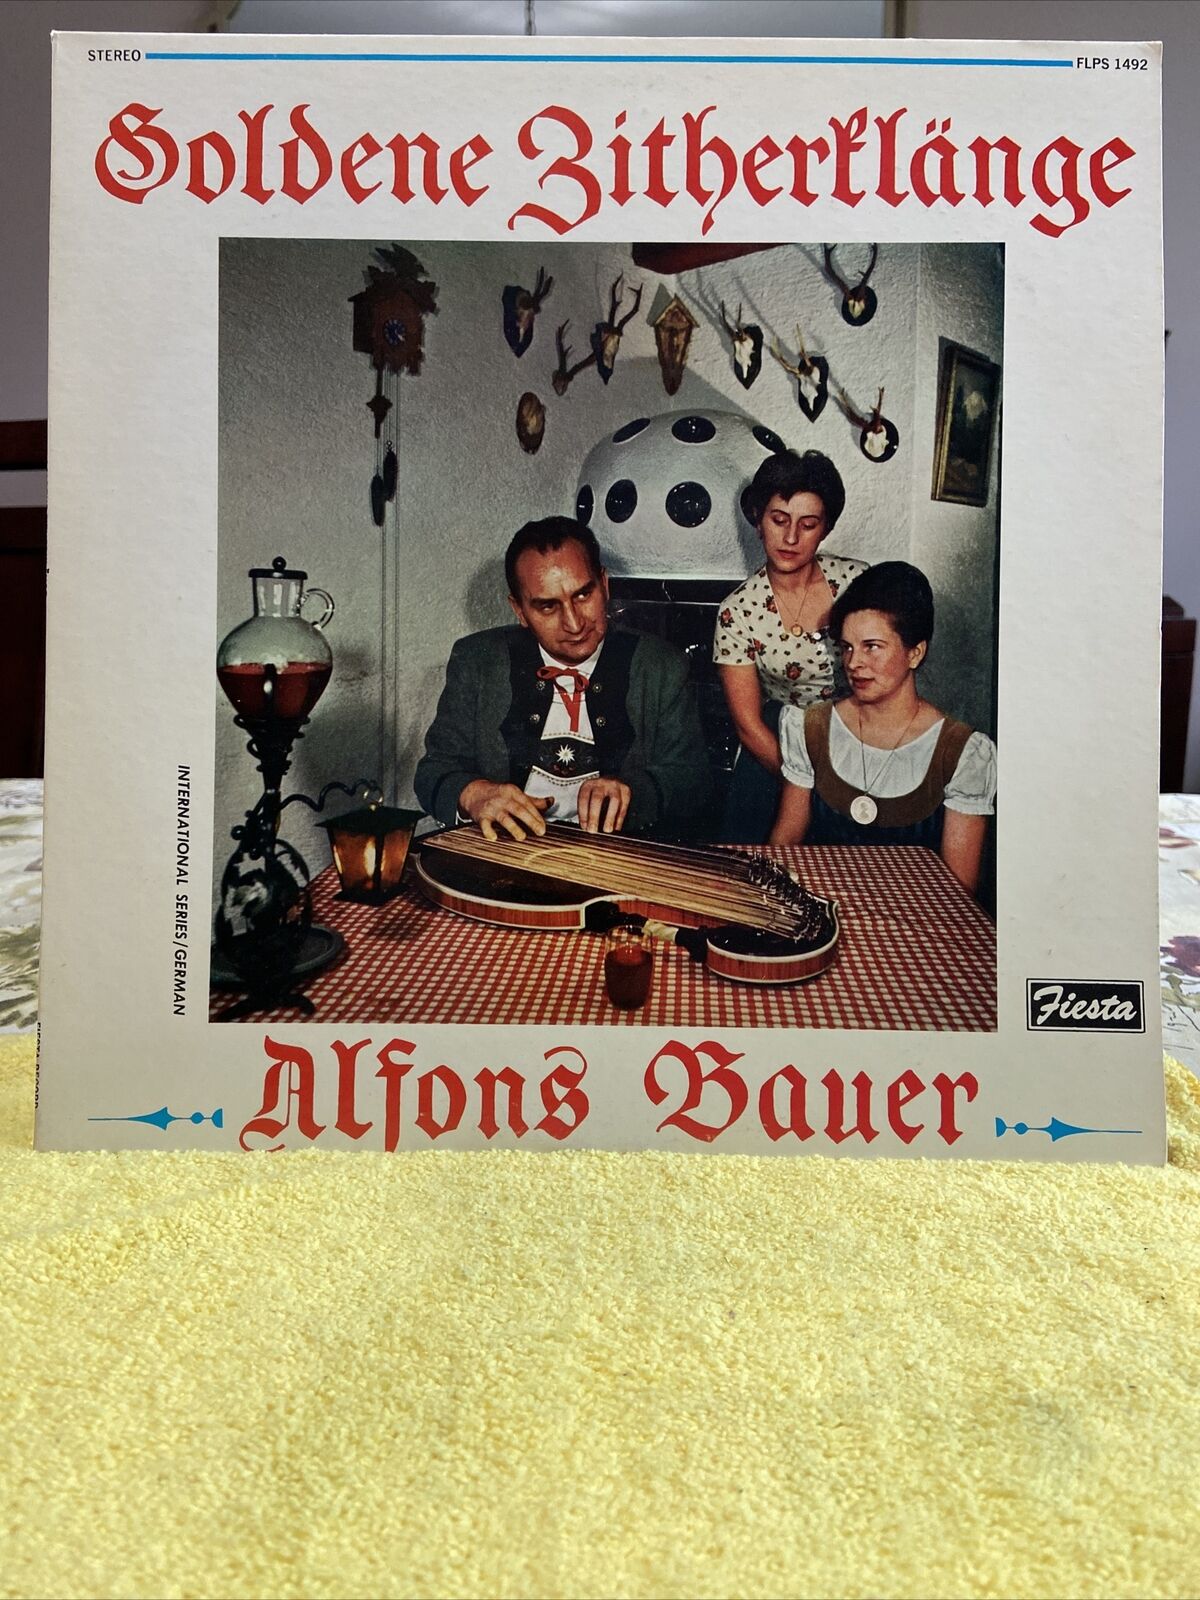 Alfons Bauer - Goldene Zitherflange -Fiesta Records,FLPS 1492,Free Shipping